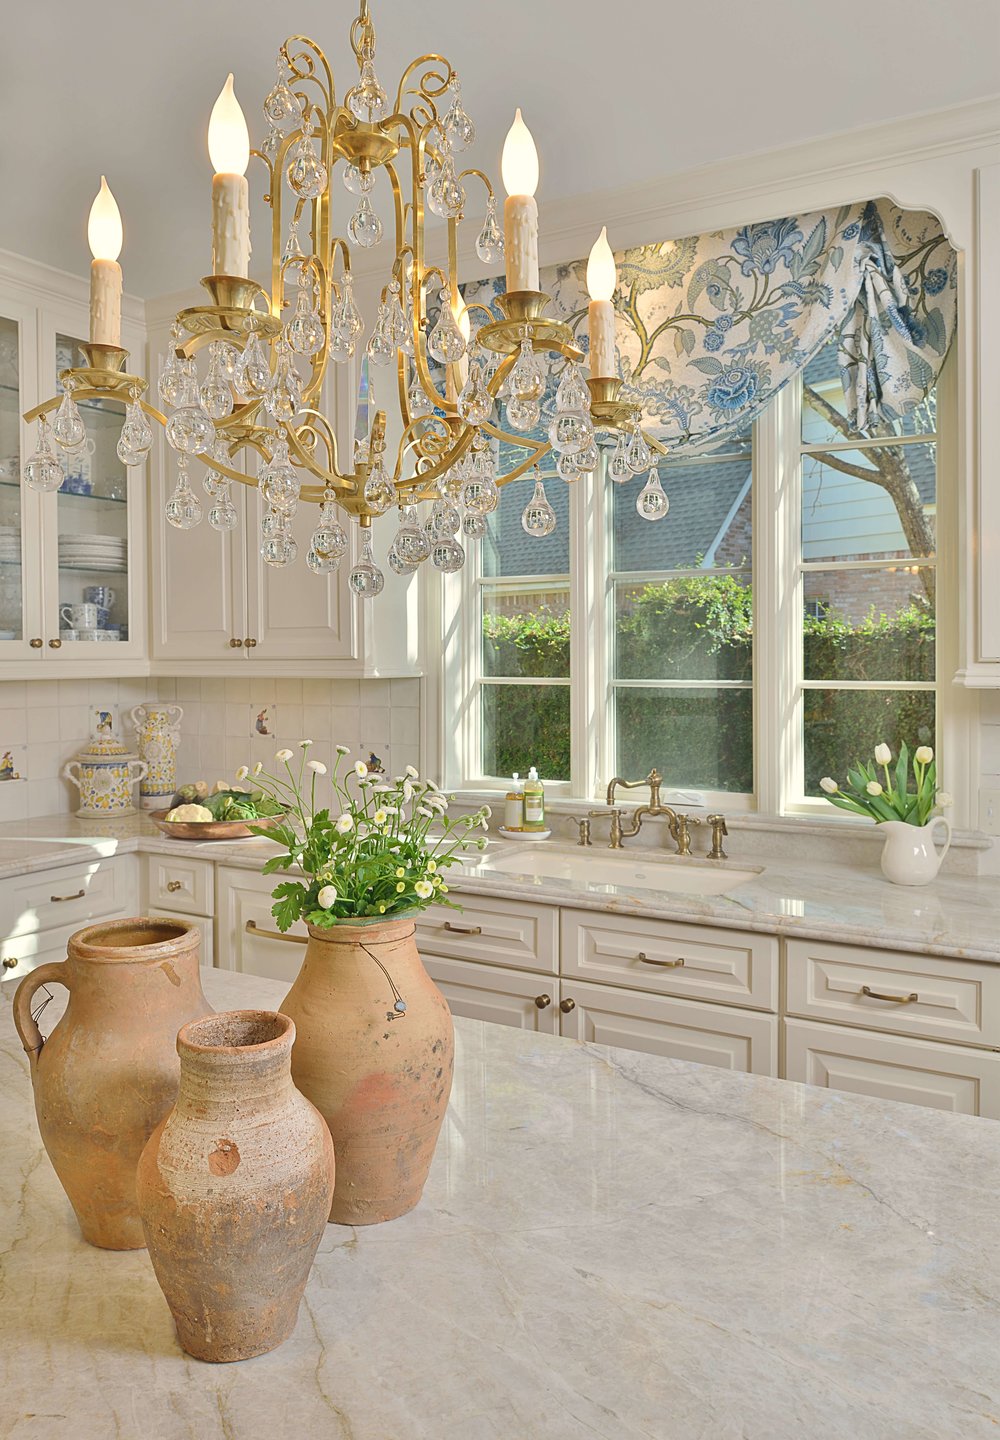 7 Considerations For Kitchen Island, Chandeliers Over Kitchen Island